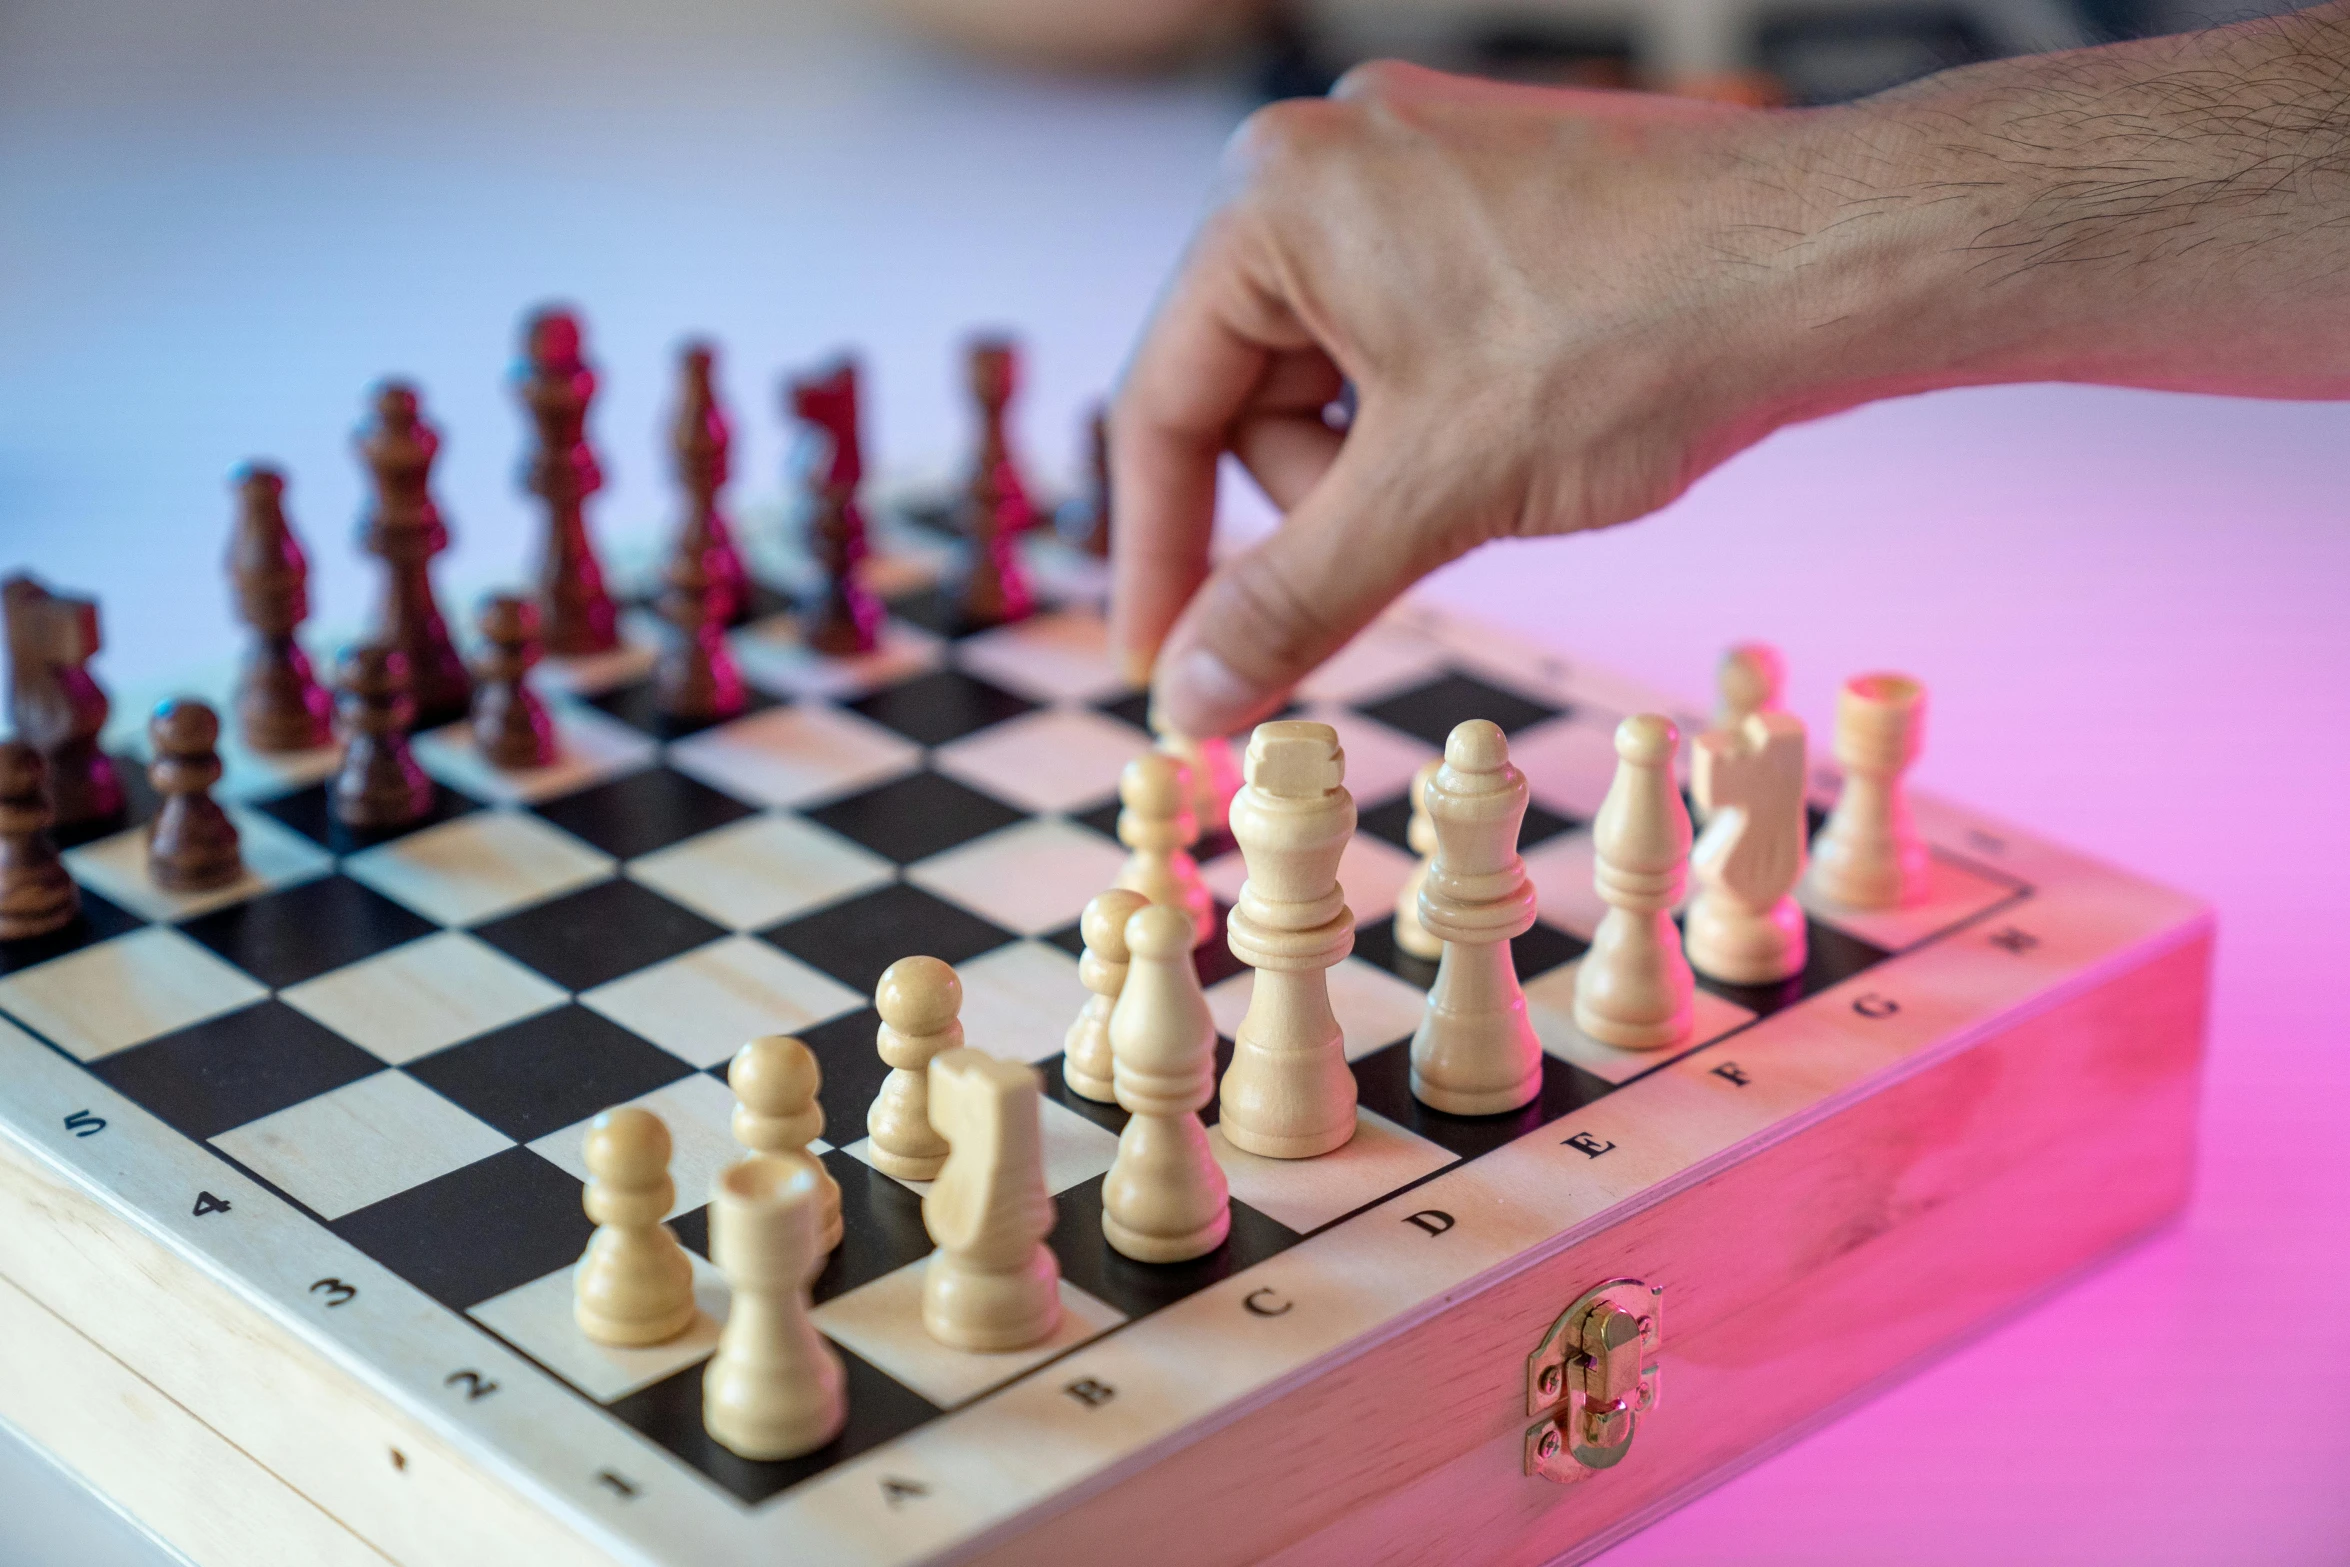 a wooden chess board with a hand reaching for it